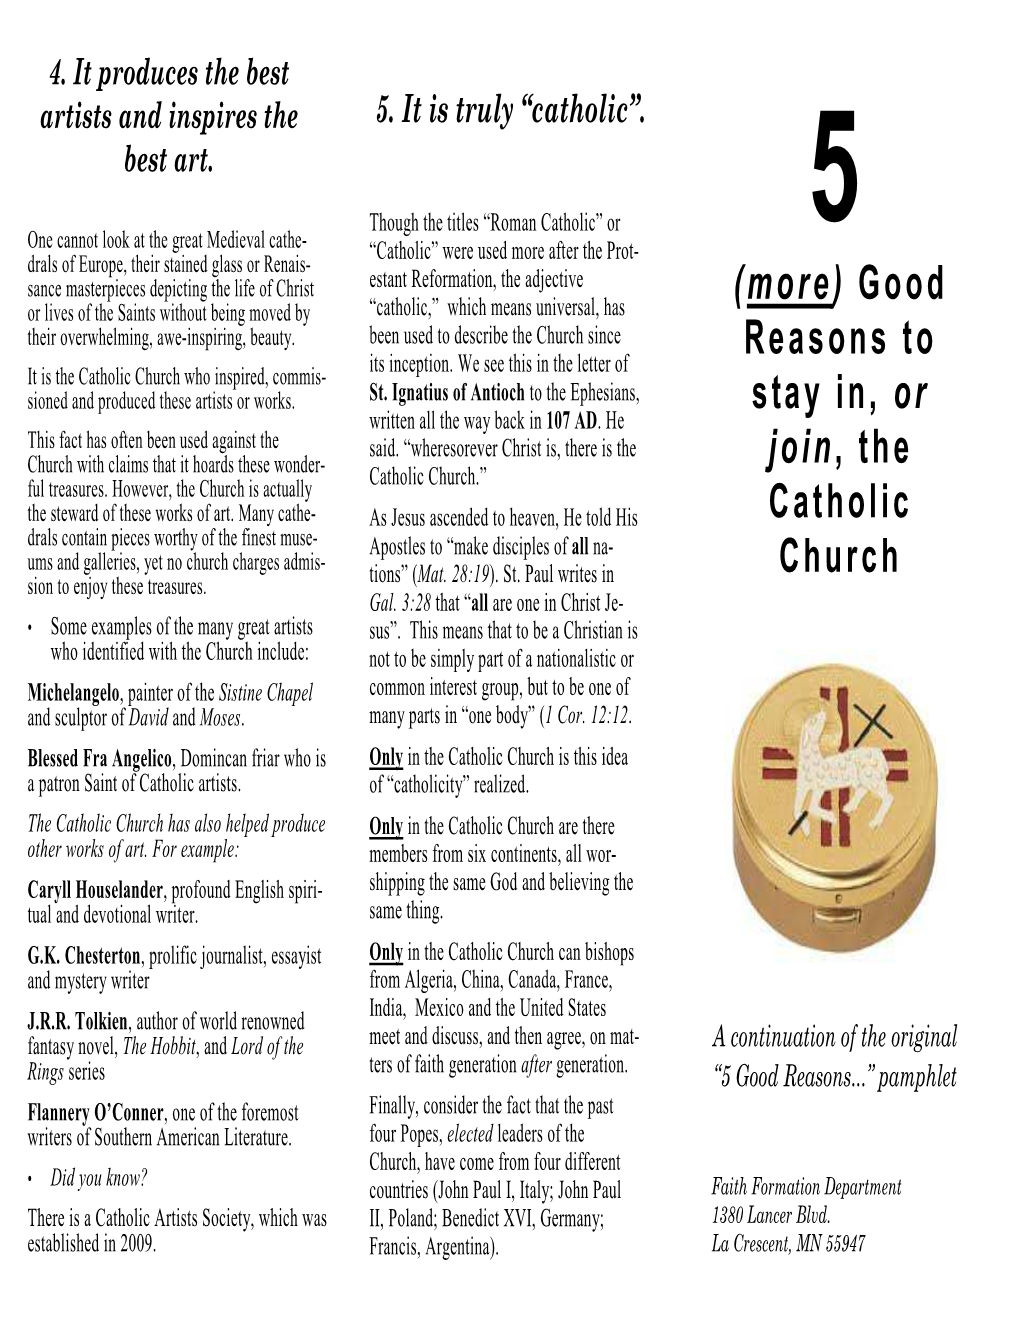 5 More Good Reasons to Stay In, Or Join, the Catholic Church